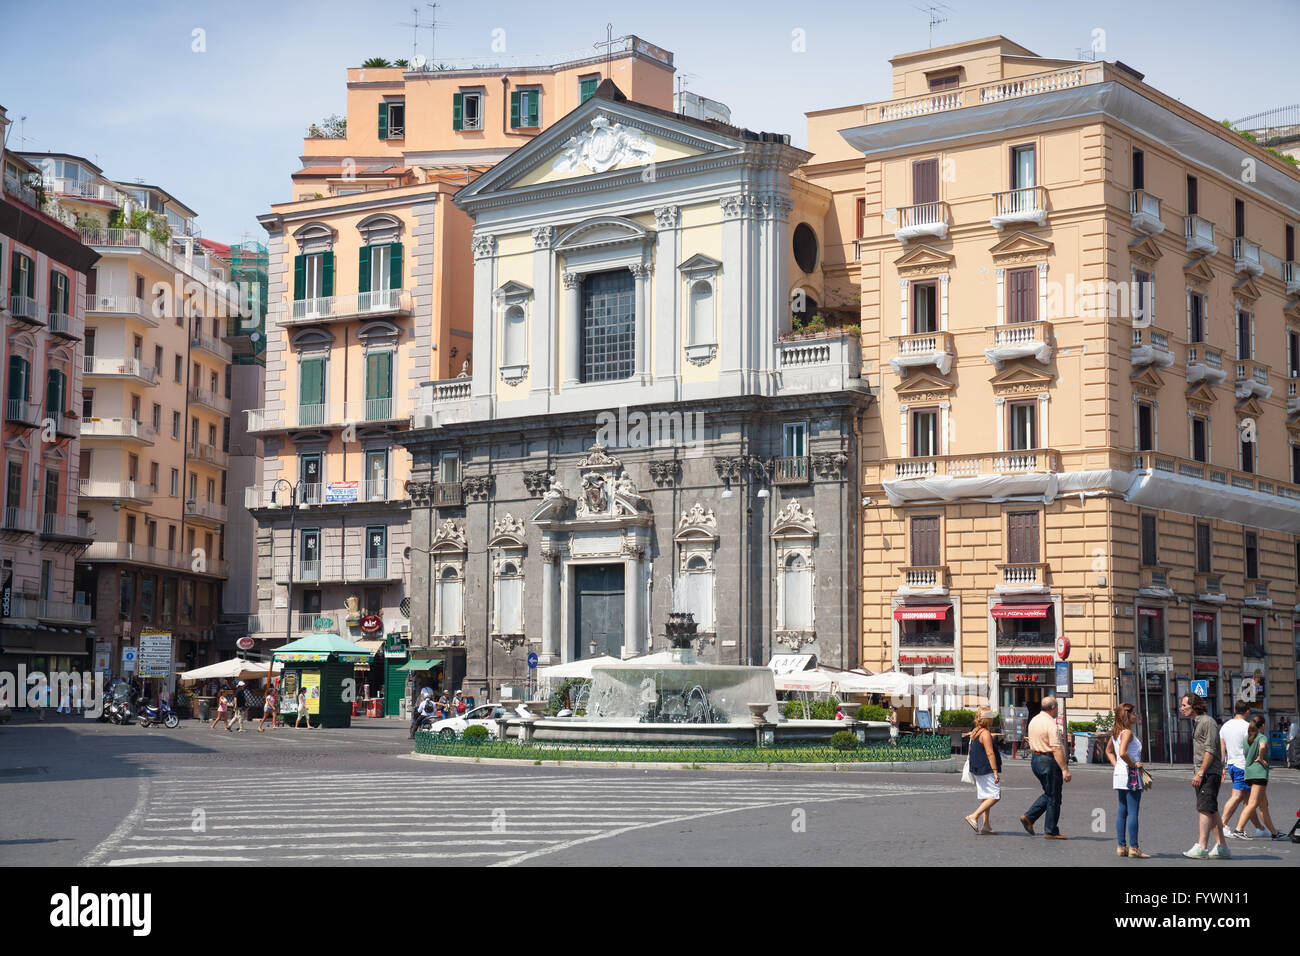 Naples, Italy - August 9, 2015: Ordinary people walking on Piazza Trieste E Trento, street view with facade of Galleria Umberto Stock Photo